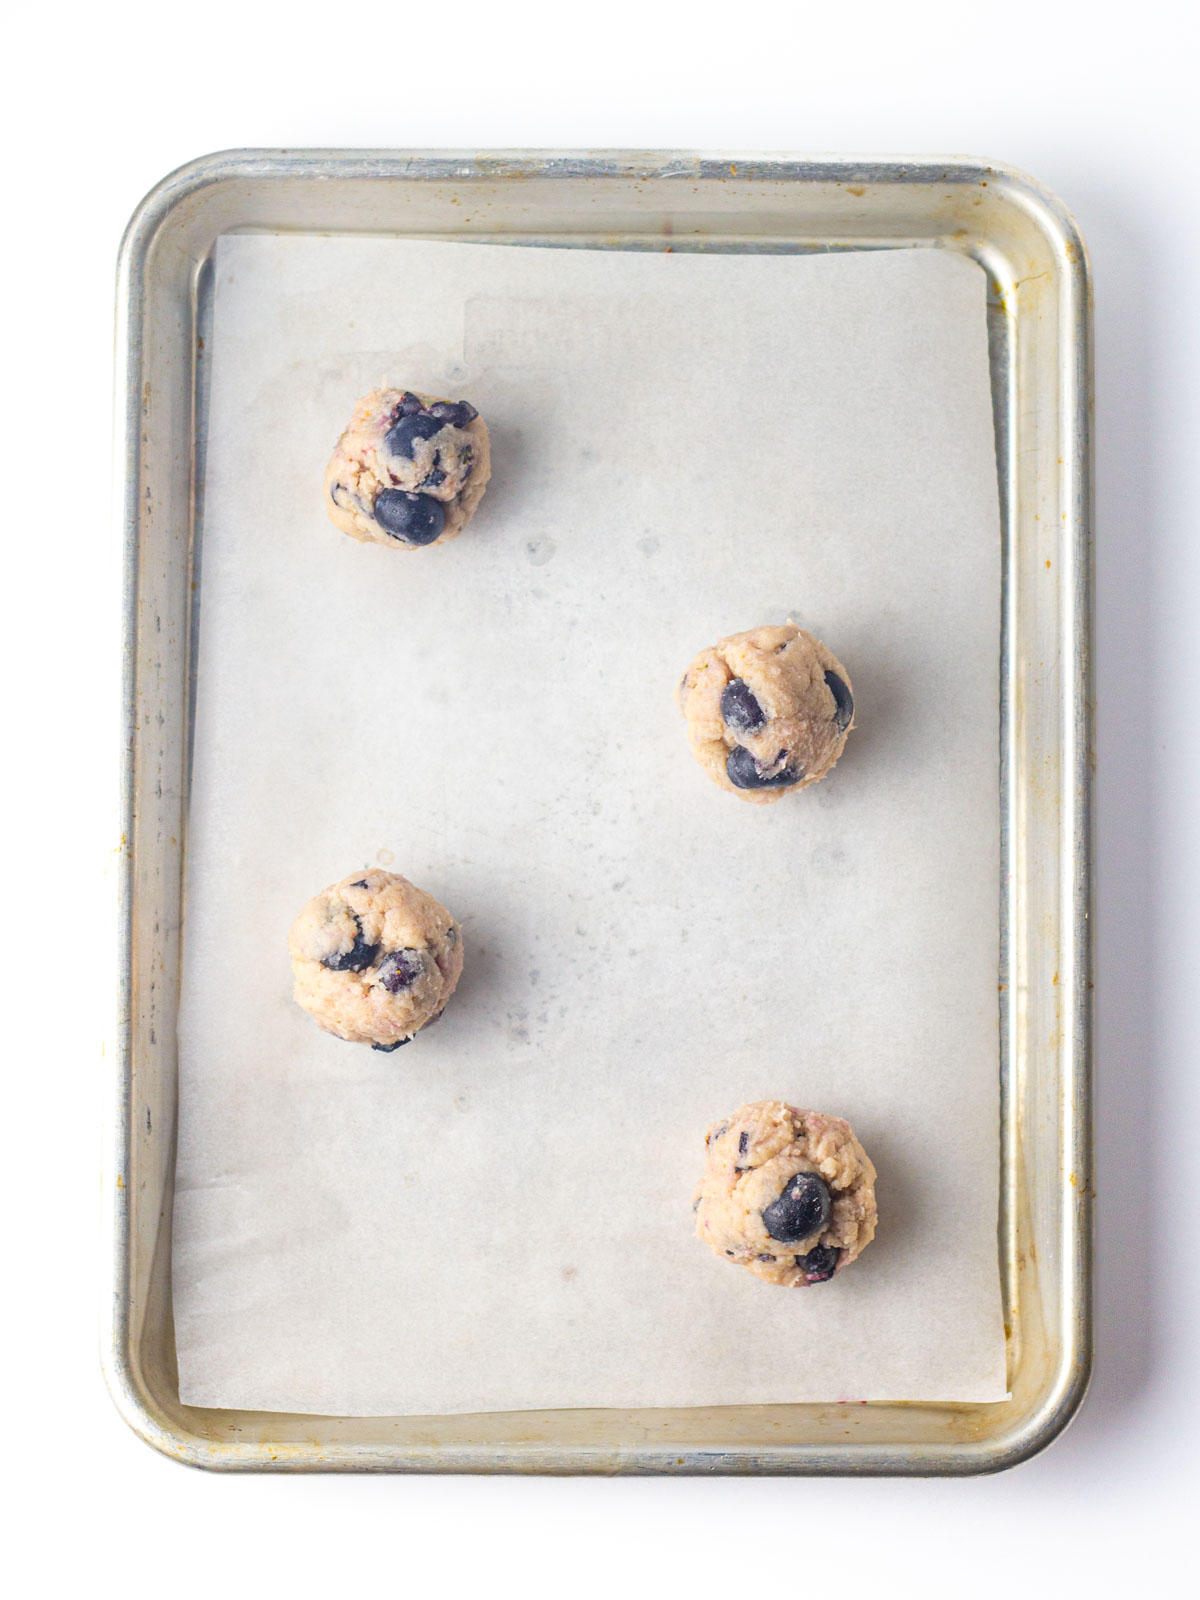 Four blueberry cookie dough balls staggered on a parchment lined baking sheet.